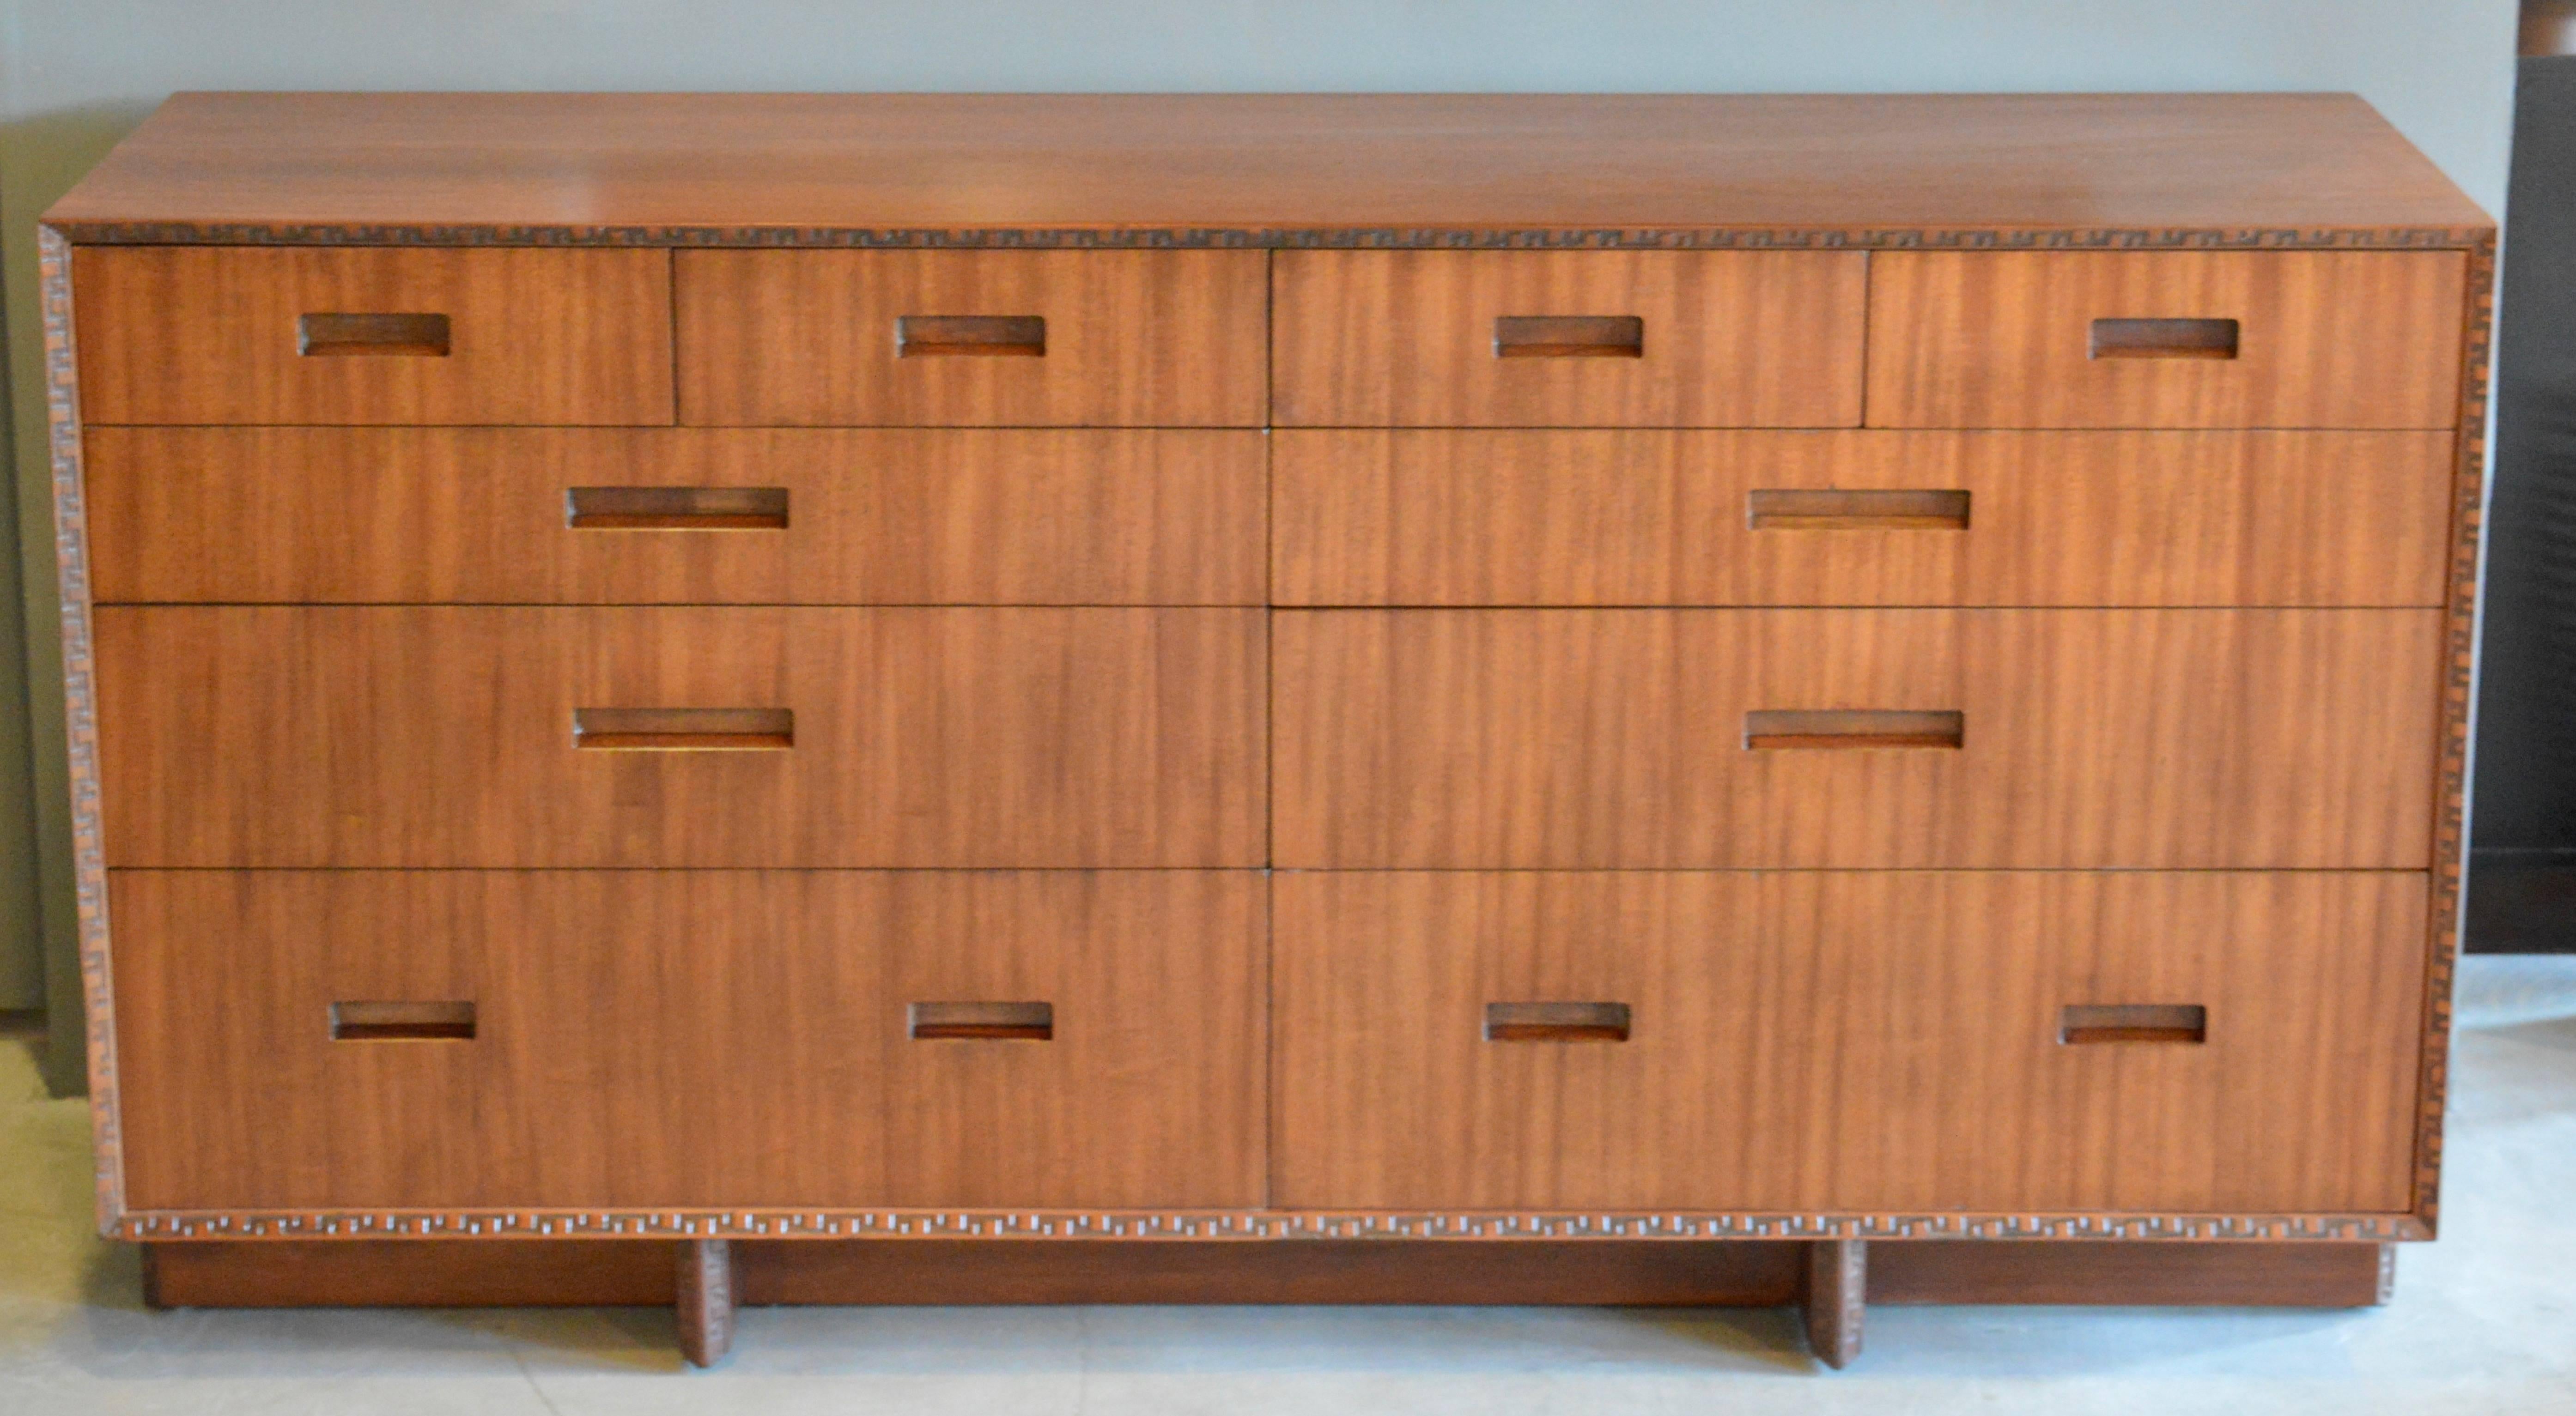 Gorgeous mahogany dresser by Frank Lloyd Wright for Henredon. This was part of the Taliesin collection. Six large drawers on lower half with four small drawers bordering the top. Great lines and classic design!

 